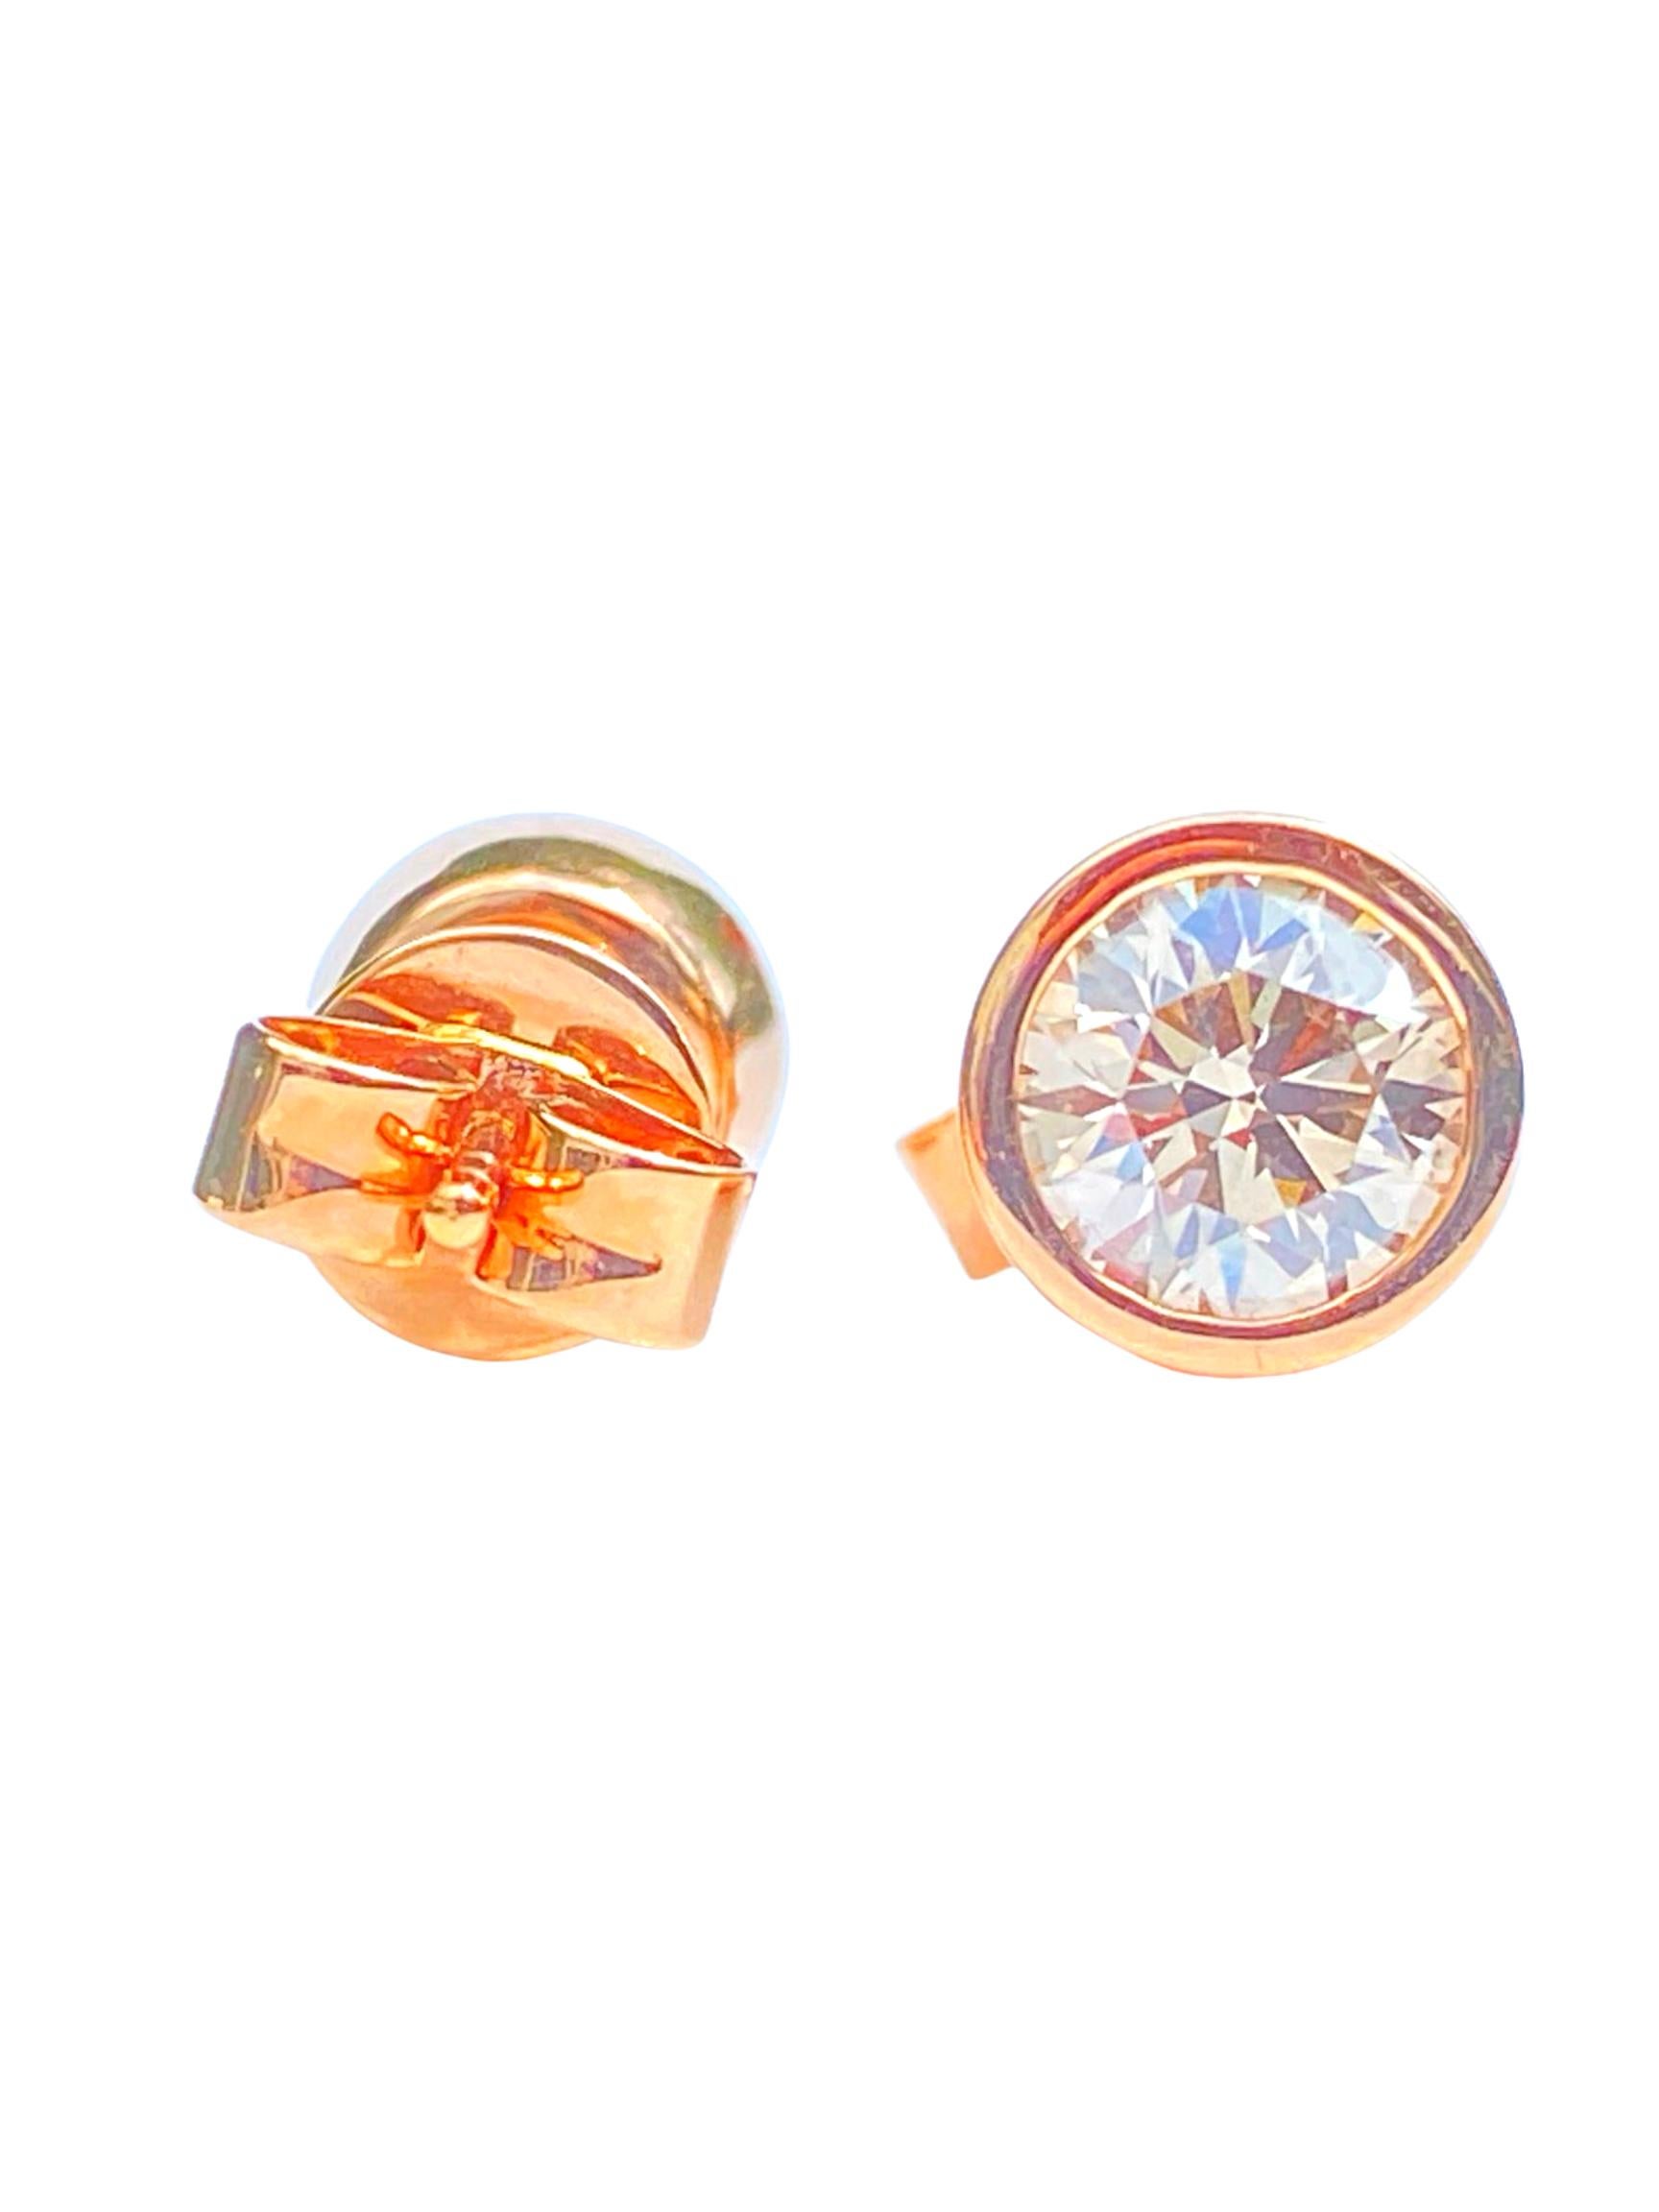 Minimalist and elegant Diamond and 18K Rose Gold Stud Earrings– centering two Round-Brilliant Cut Diamonds totaling 1.58 Carats and set in 18K Rose Gold. 

Details:
✔ Stone: Diamond
✔ Center-Stone Weight: 1.58 Carats Total (2 pcs)
✔ Stone Cut: